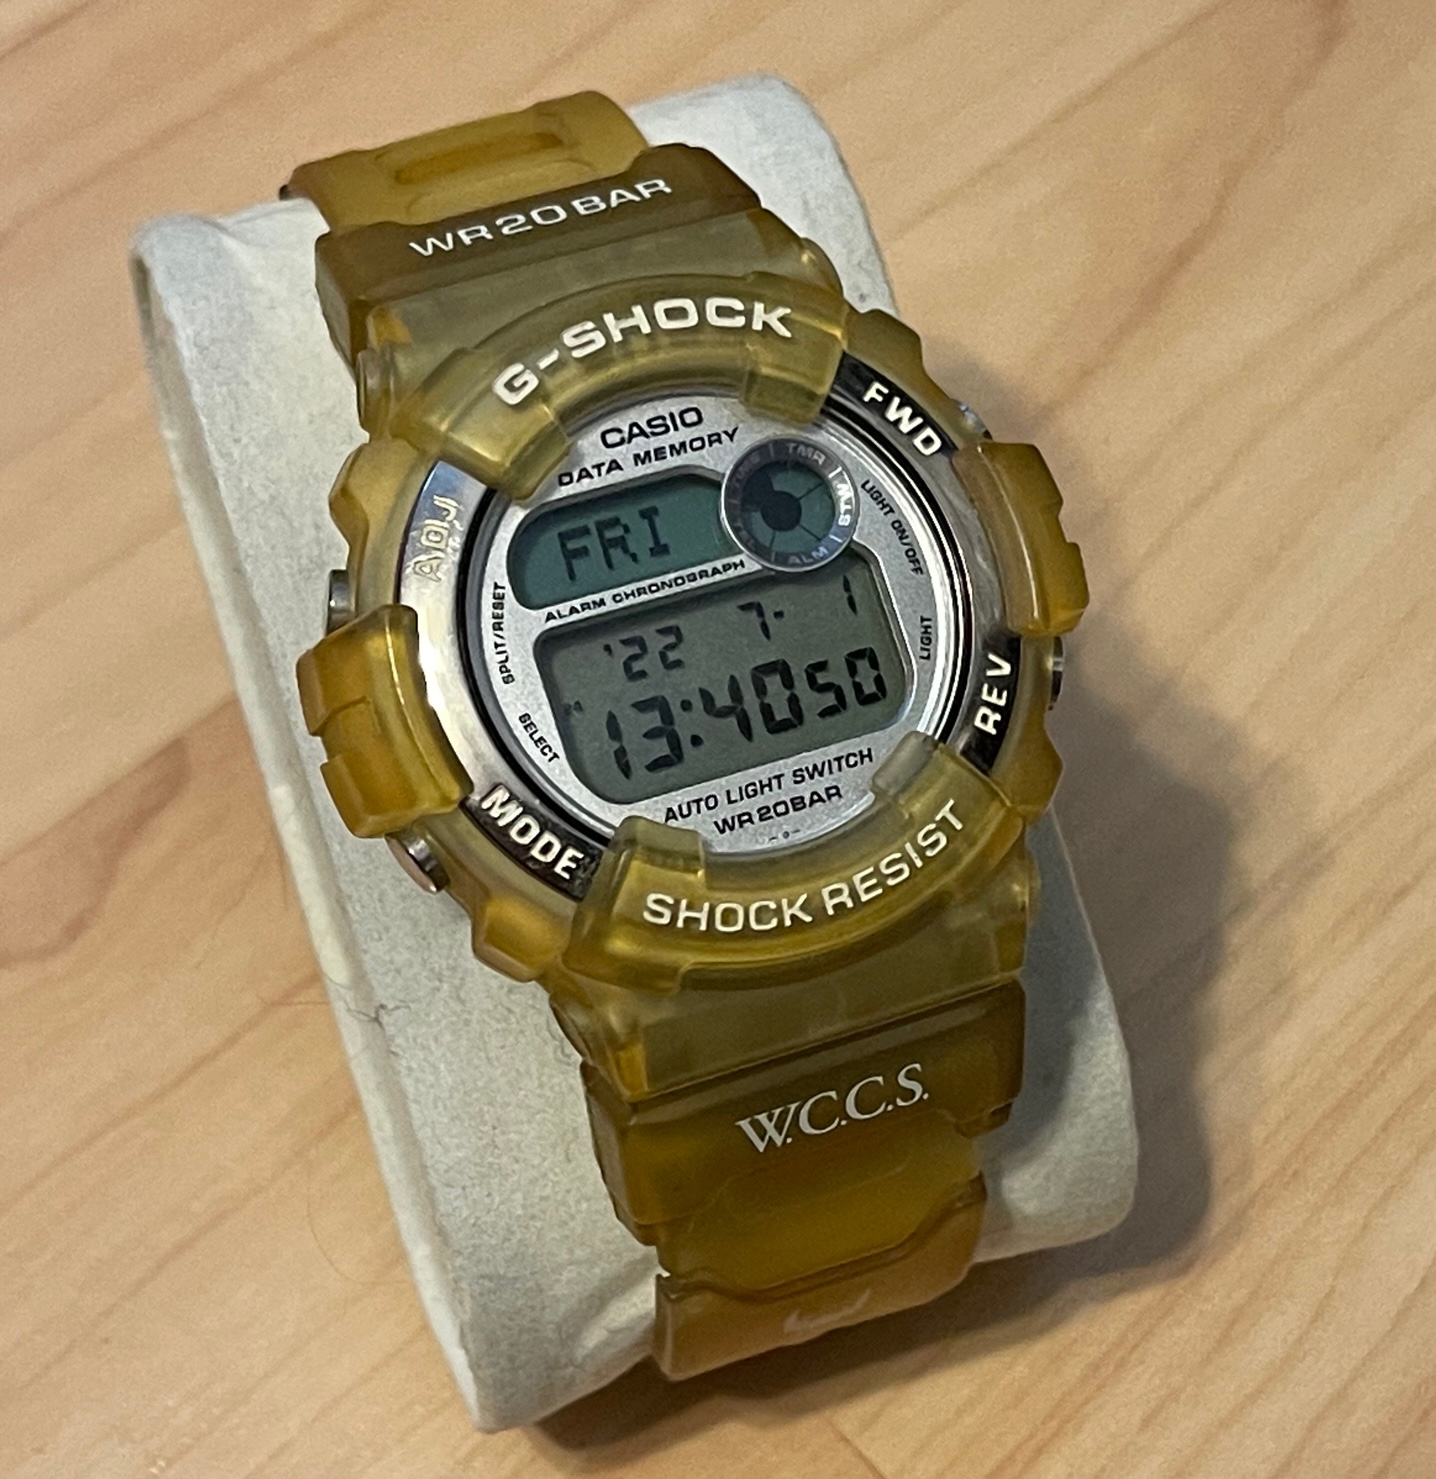 WTS] Casio G-Shock DW9600WC WCCS World Coral Reef Conservation